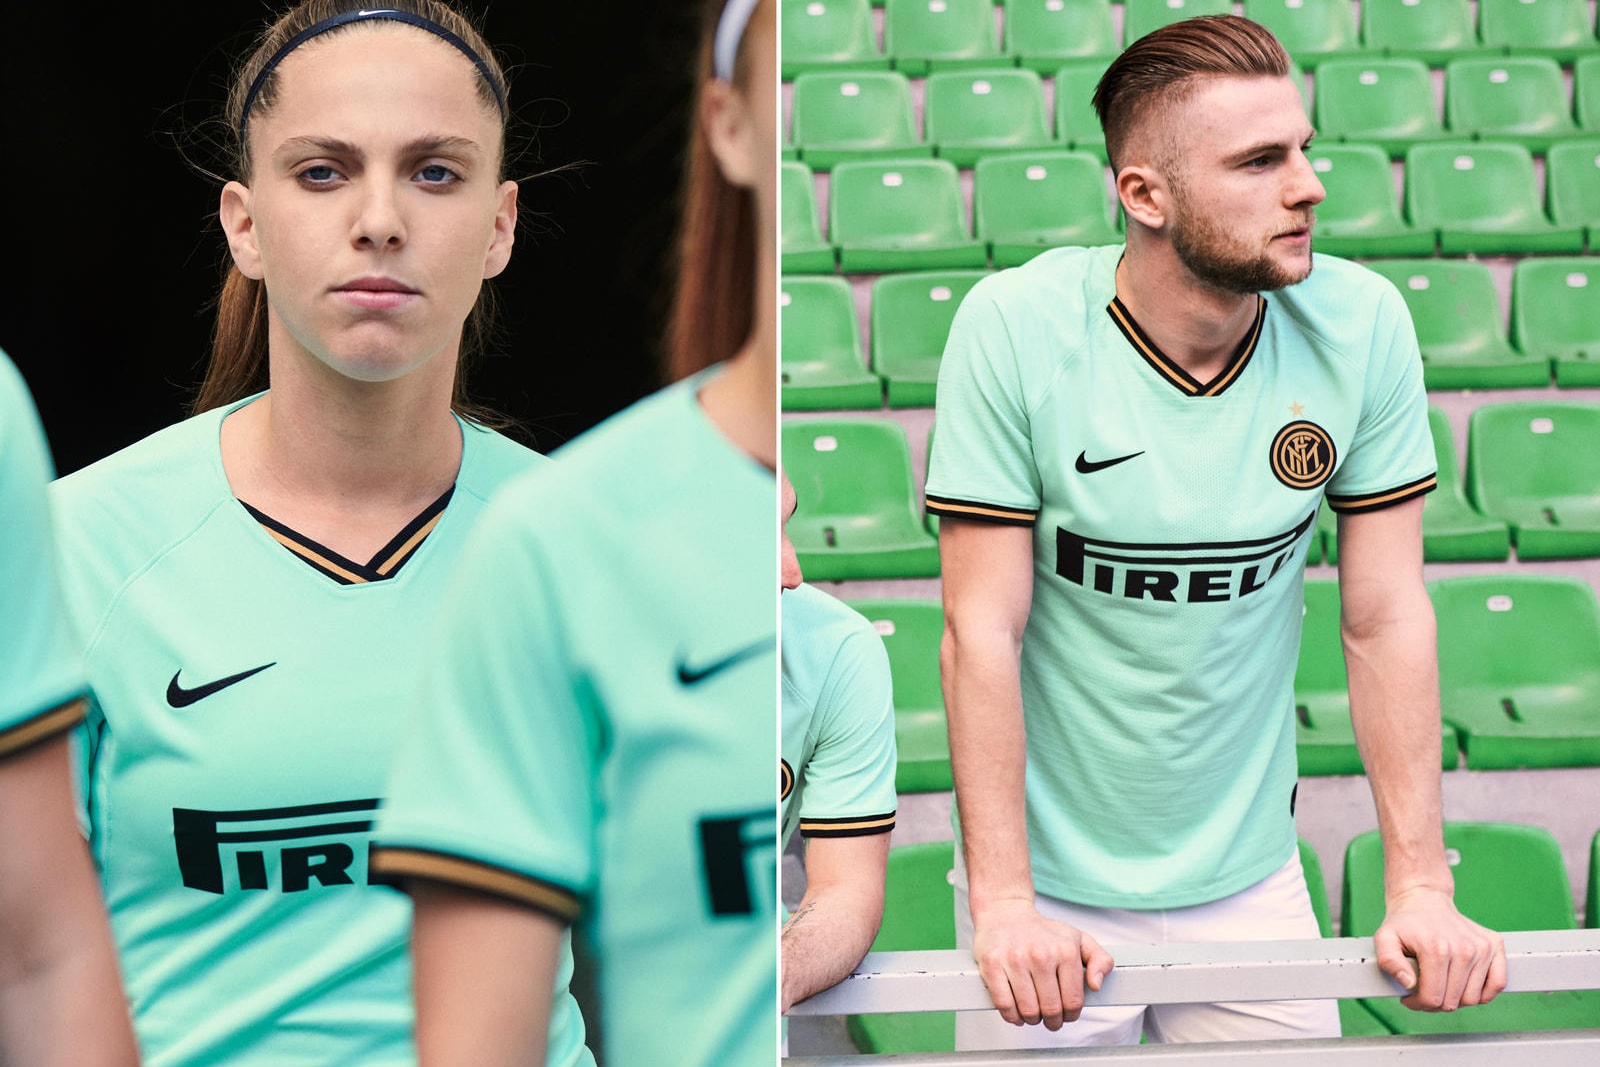 nike football away kit release information inter milan internazionale italy teal aquamarine black gold buy cop purchase june 26 serie a coppa italia champion's league